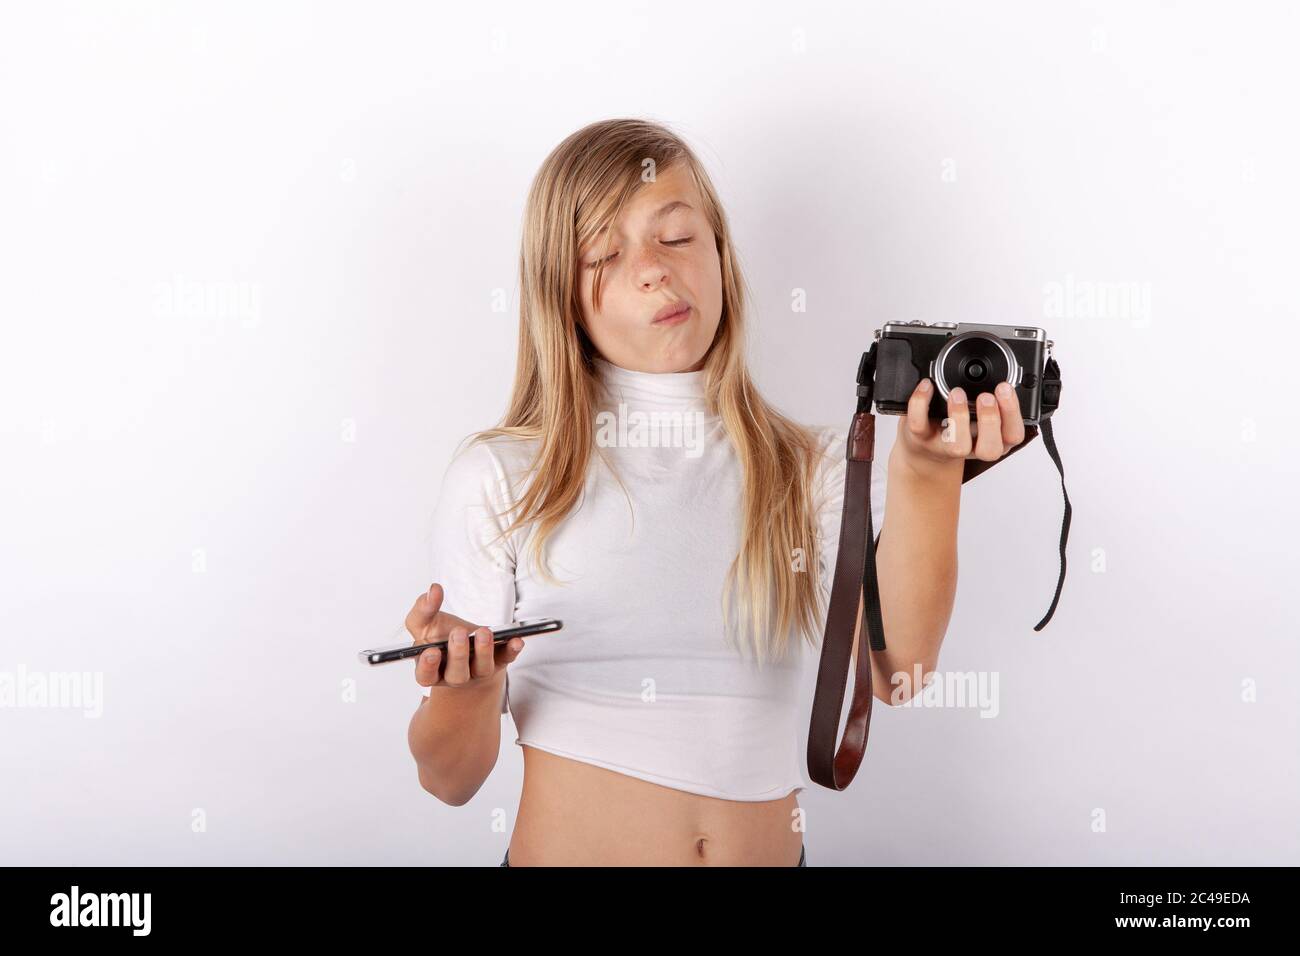 Teen girl cant choose between smartphone and compact camera. Mobile phone versus classic camera concept Stock Photo